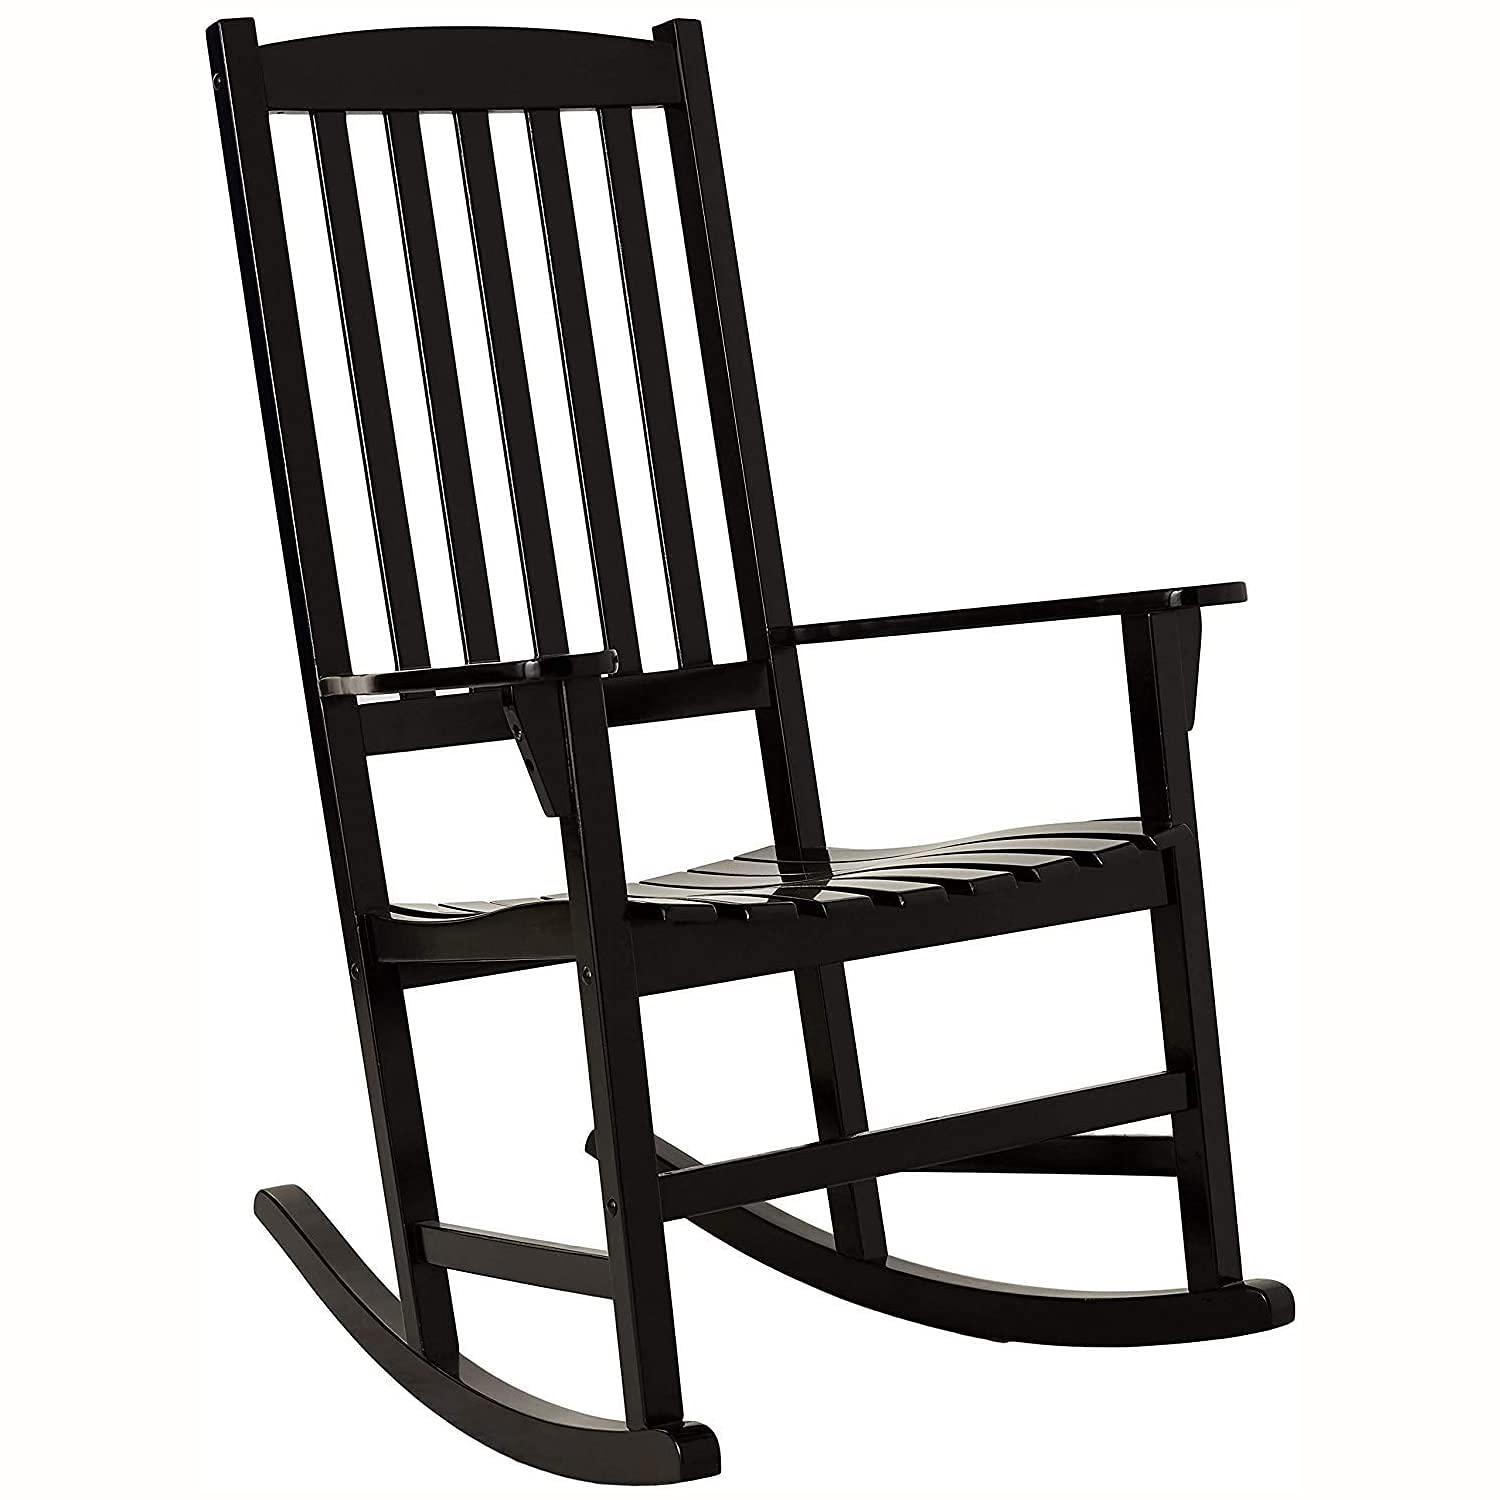 cambridge casual bentley outdoor porch rocking chair for patio furniture, solid wood, black